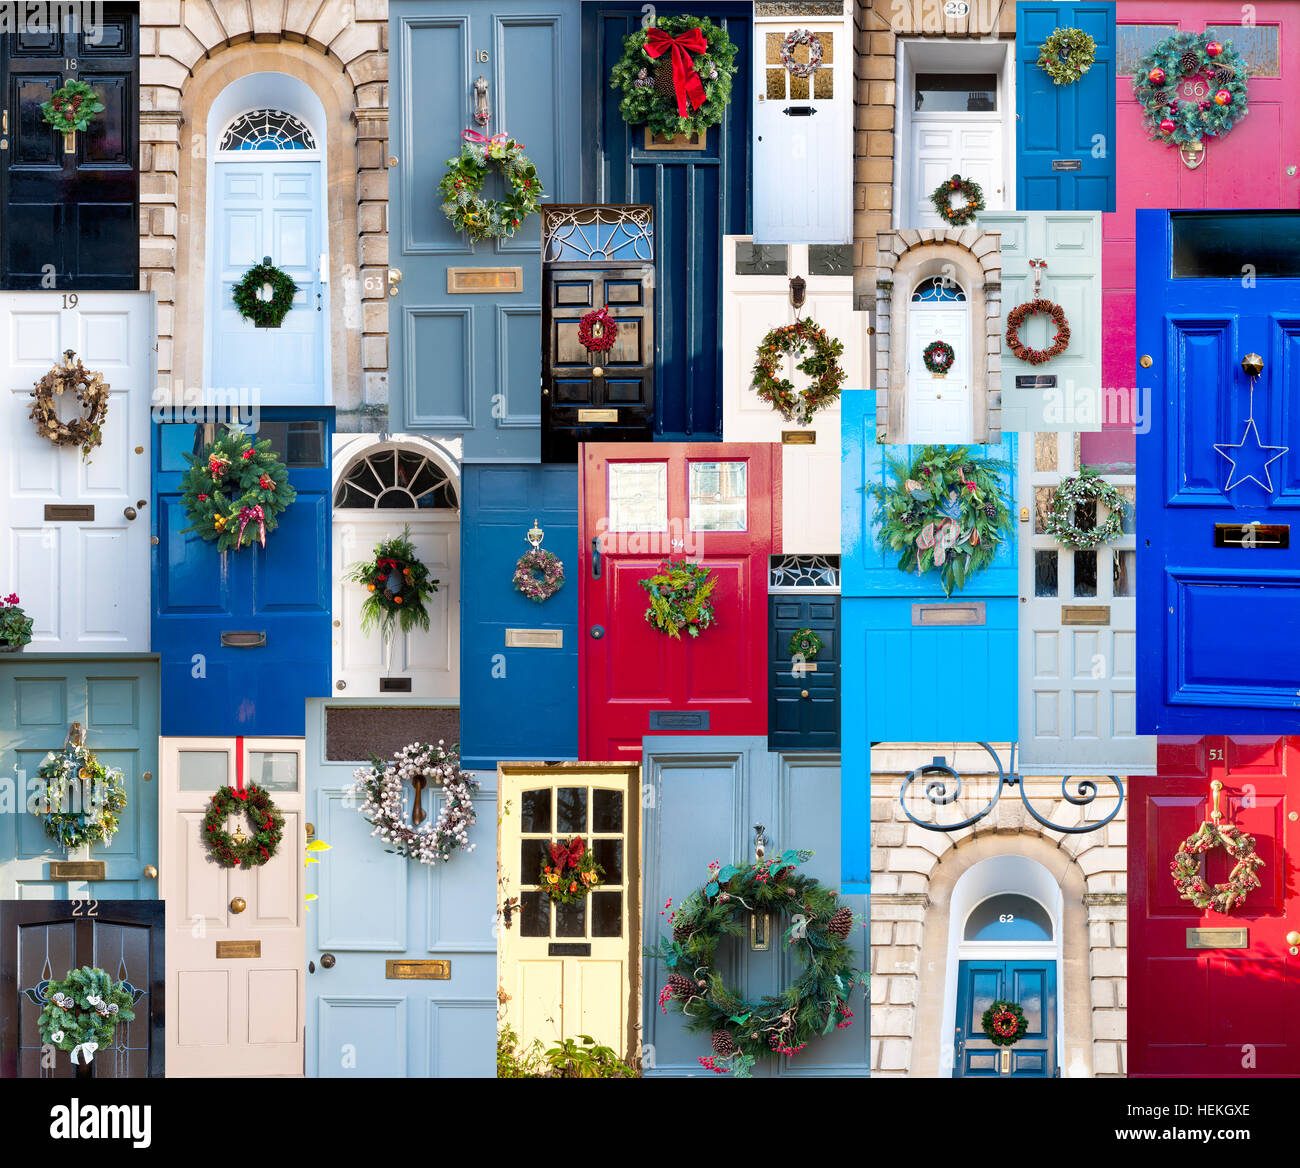 Bath, Somerset, UK.  22nd December 2016. Doors of the spa city decorated with Christmas wreaths. Individual images all photographed today. Credit: Richard Wayman/Alamy Live News Stock Photo